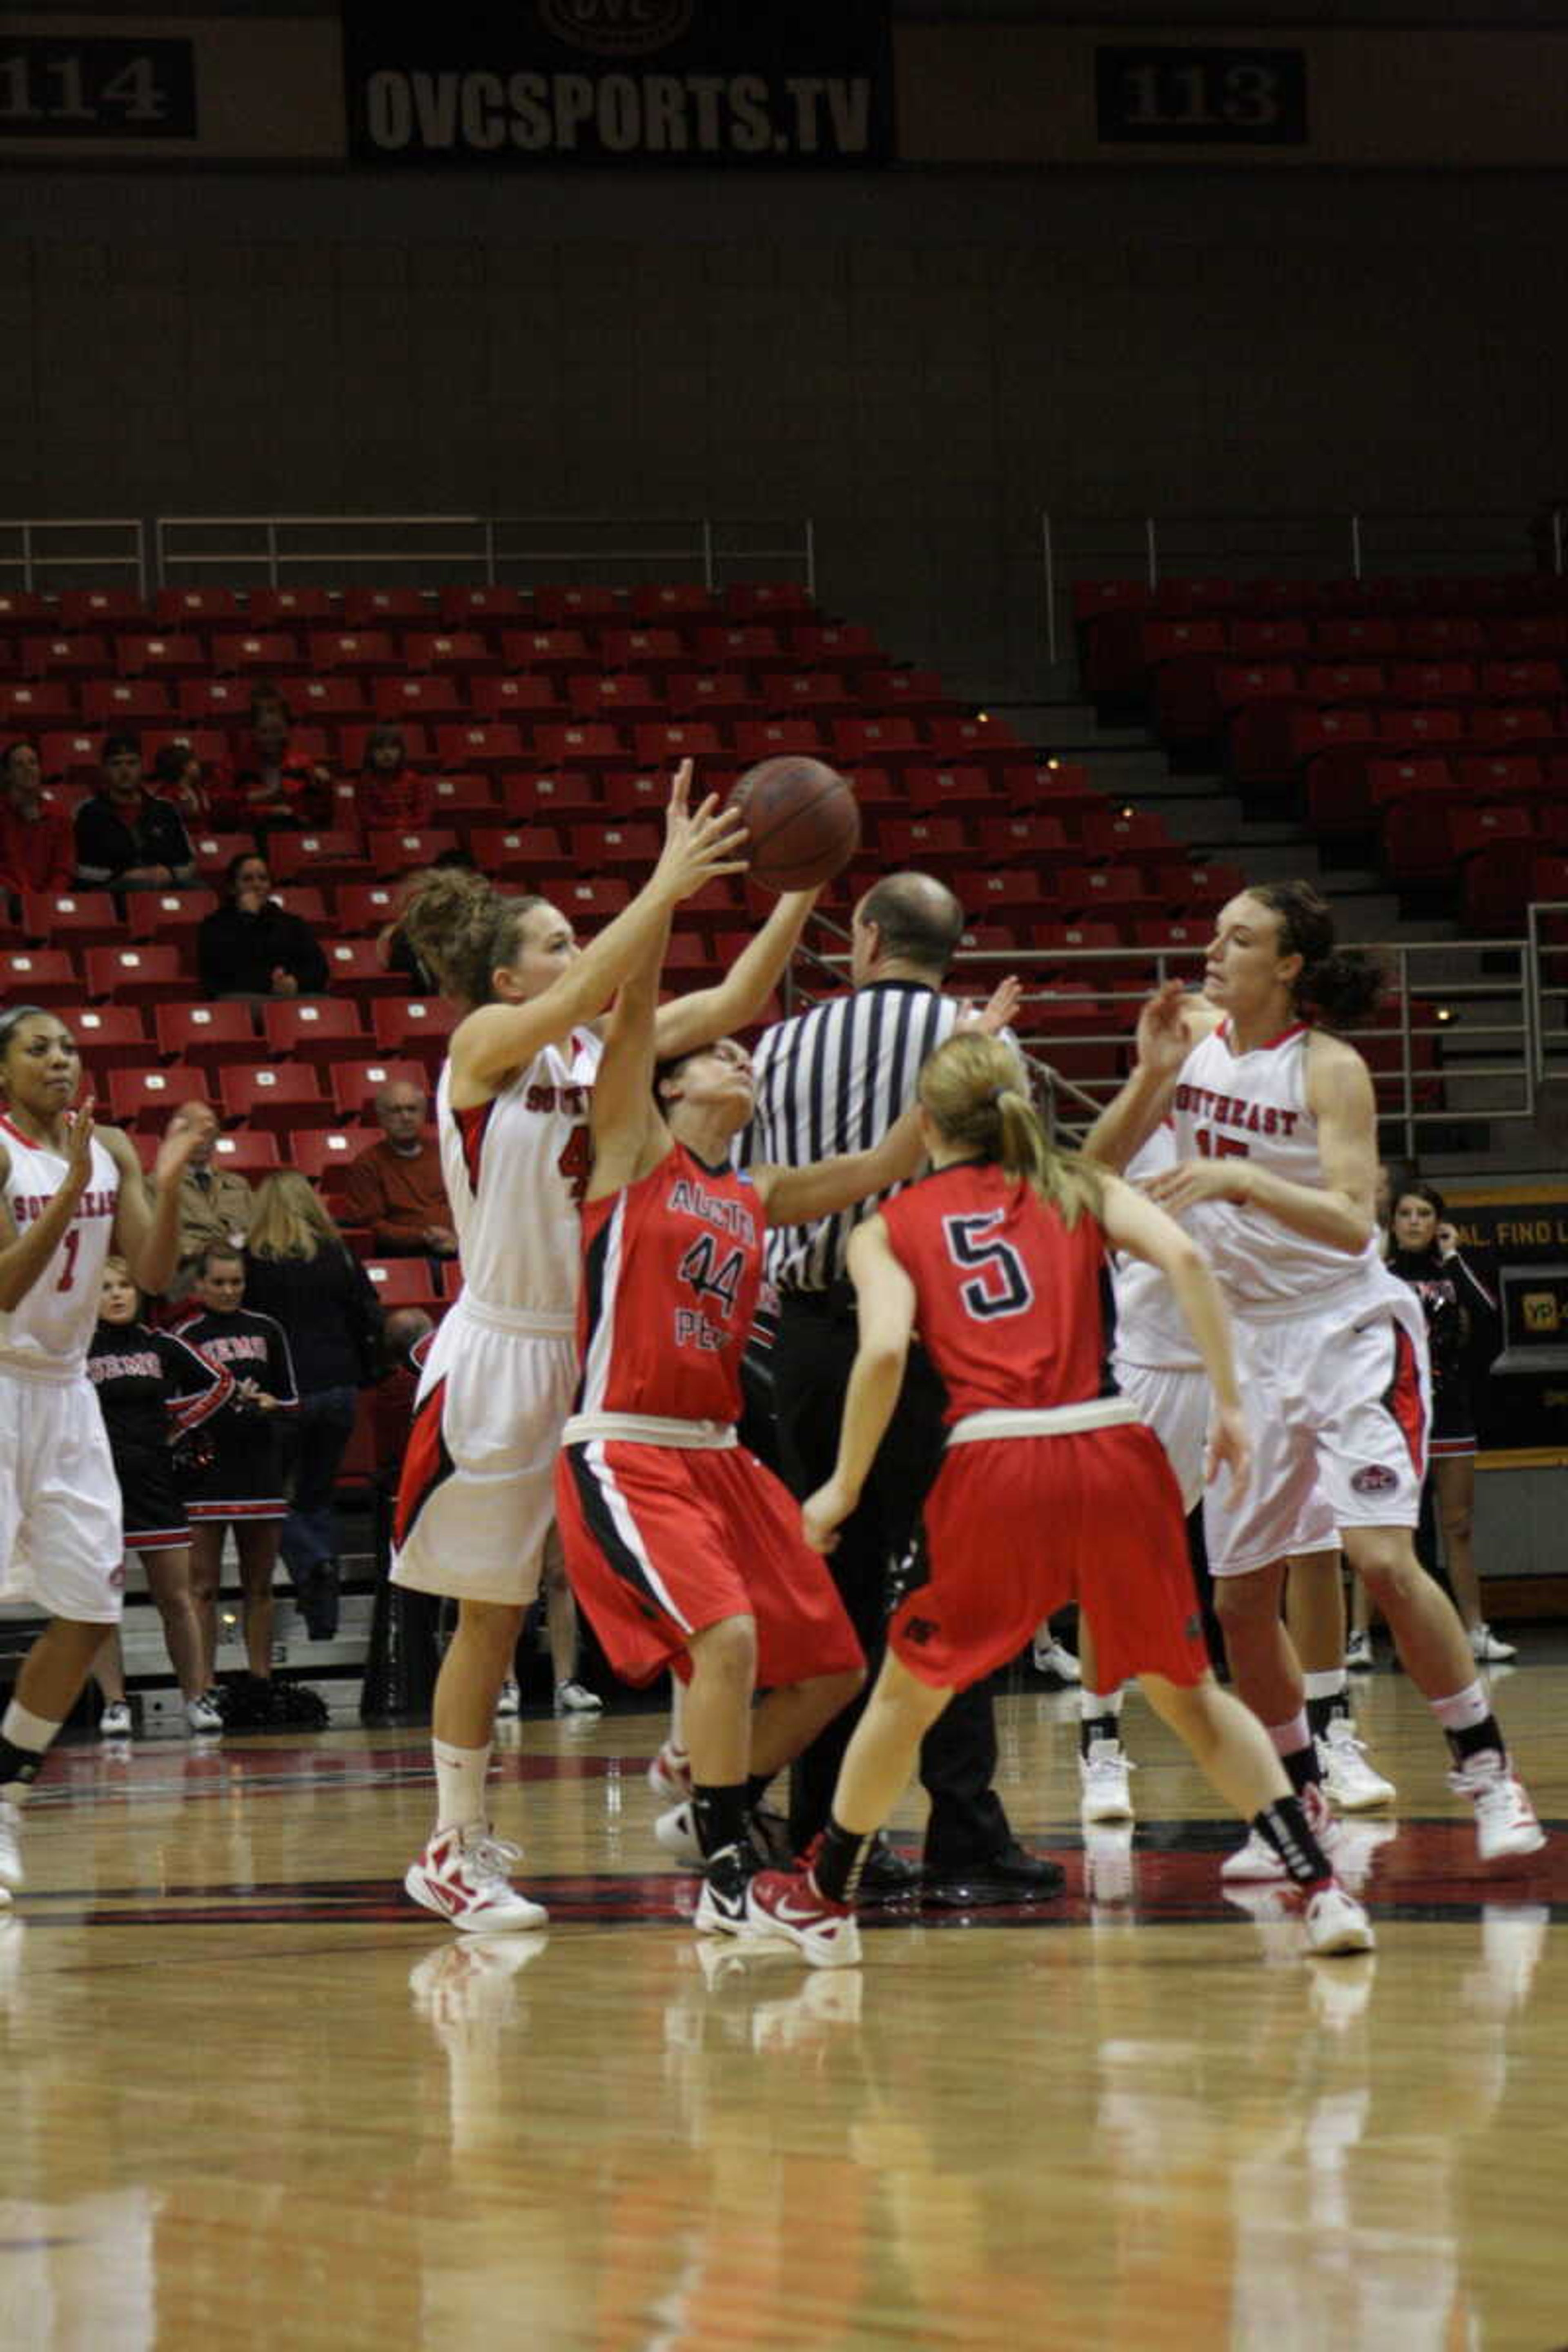 Southeast forward Bailie Roberts fights for possession of the basketball with Austin Peay guard Shelby Olszewski (44) in the first half on Monday night's game. Southeast won 69-60. - Photo by Nathan Hamilton